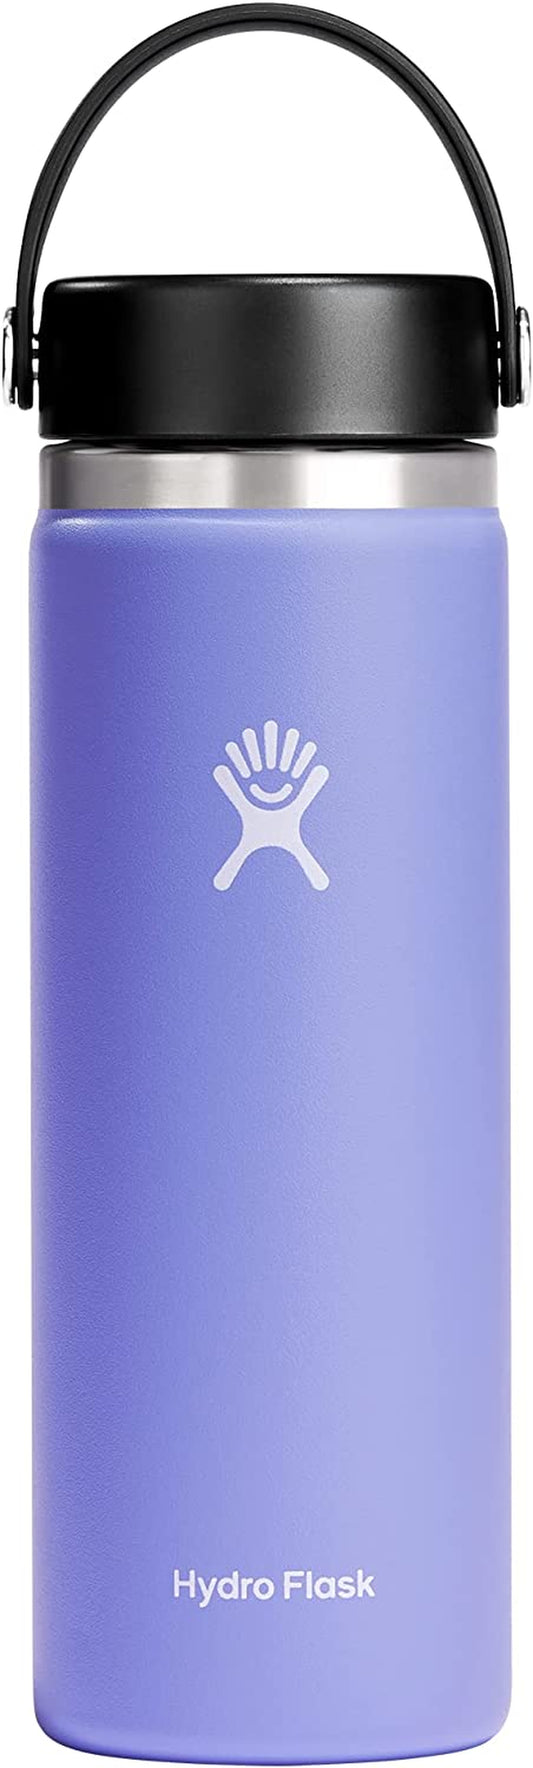 Wide Mouth Vacuum Insulated Stainless Steel Water Bottle with Leakproof Closeable Lid for Cold Water Drinks, Sports, Travel, Car and School